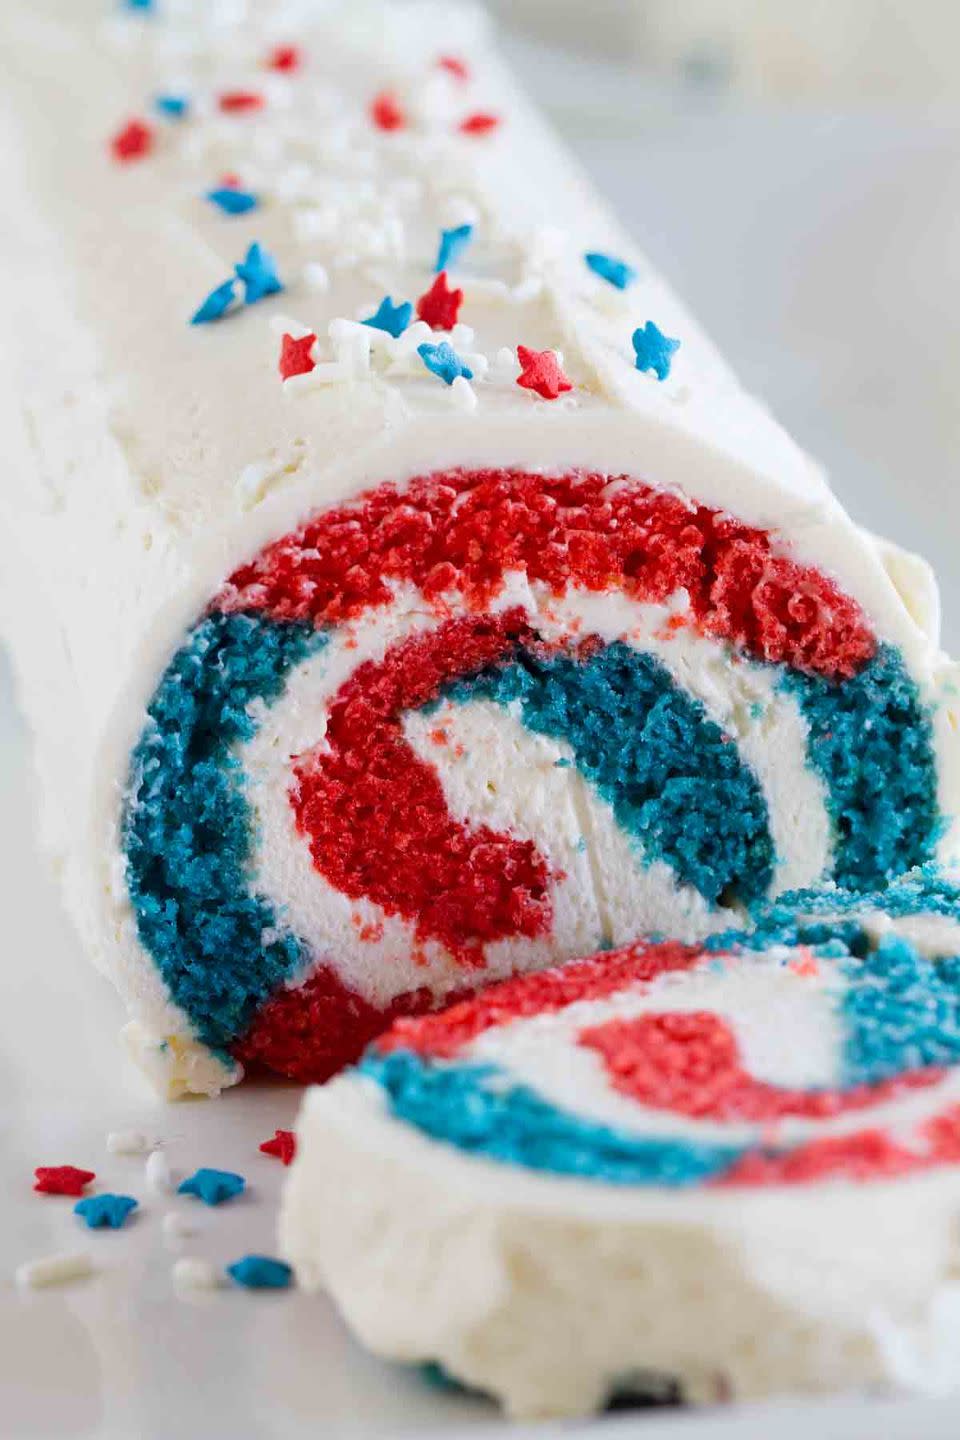 Red, White, and Blue Cake Roll